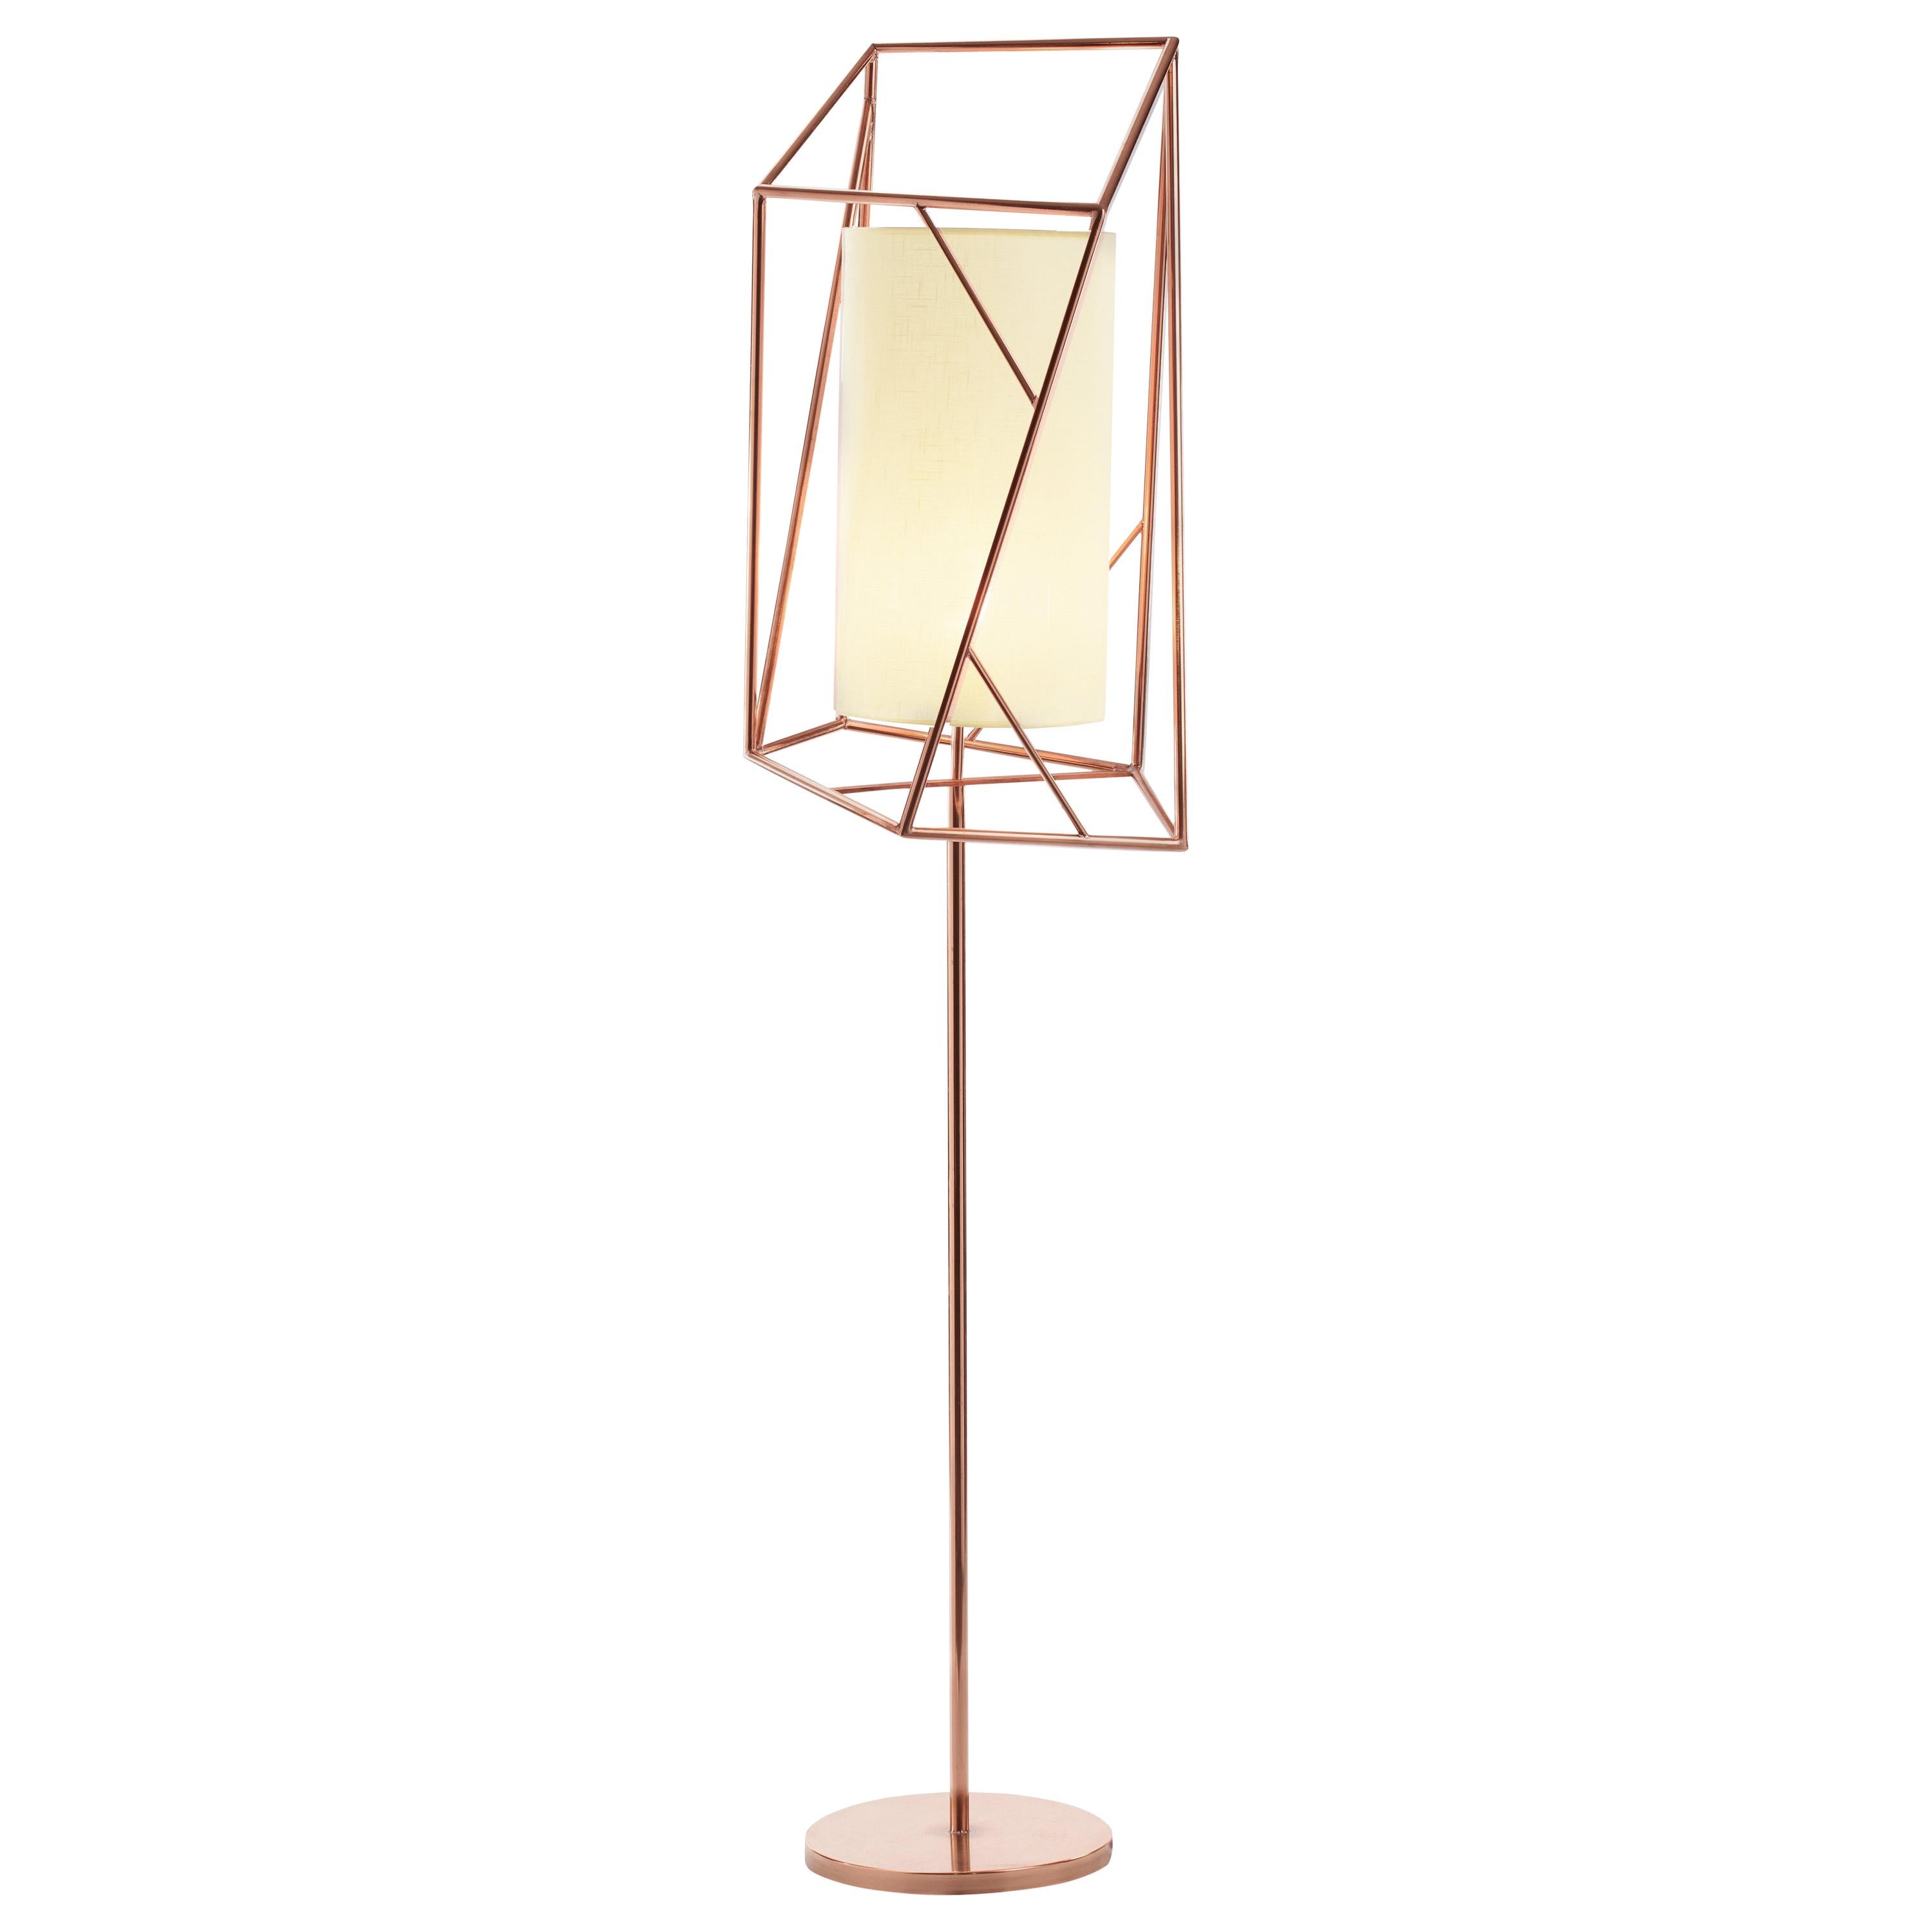 Art Deco Inspired Star Floor Lamp Polished Copper and Linen Shade